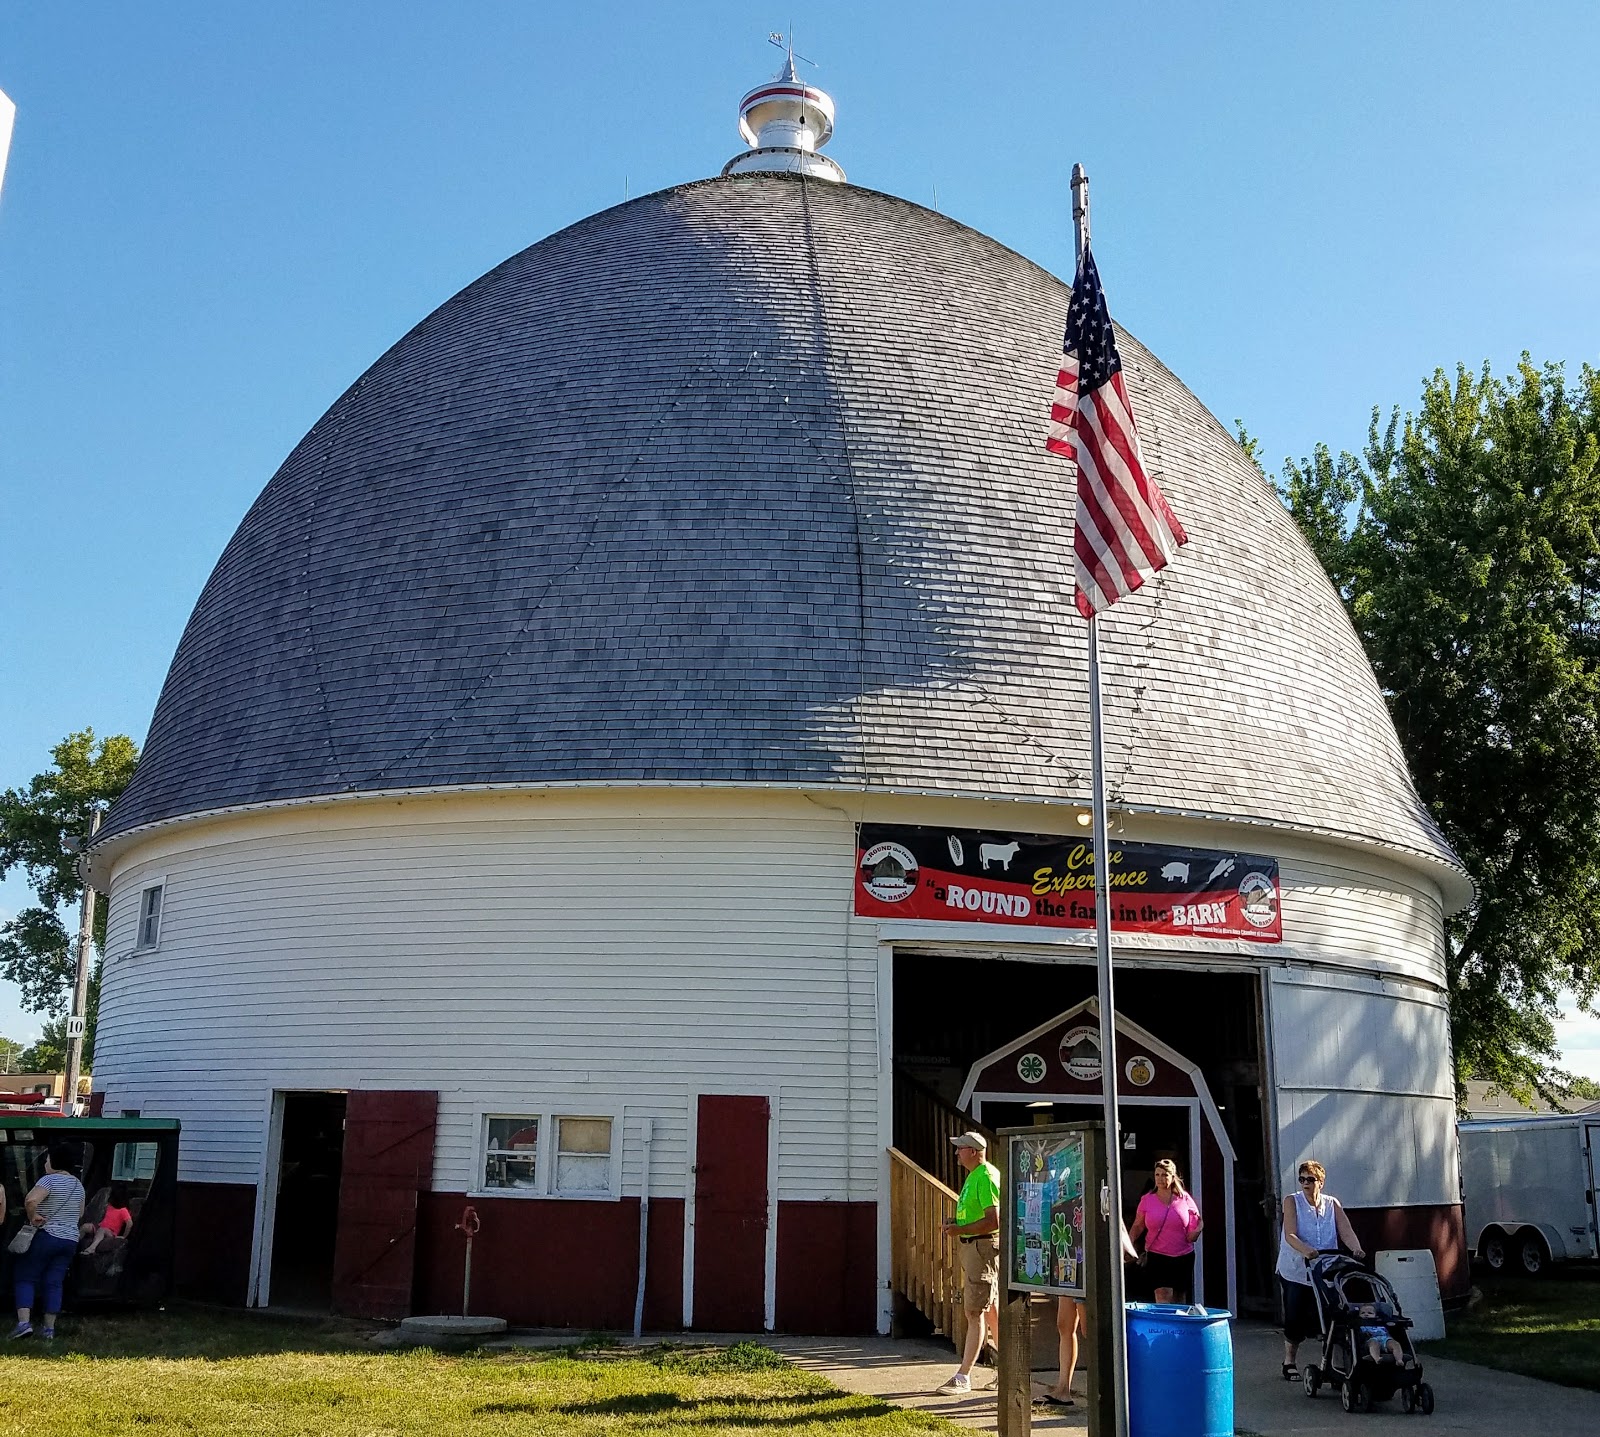 History and Culture by Bicycle: 2017 Plymouth County Fair: Round Barn 17